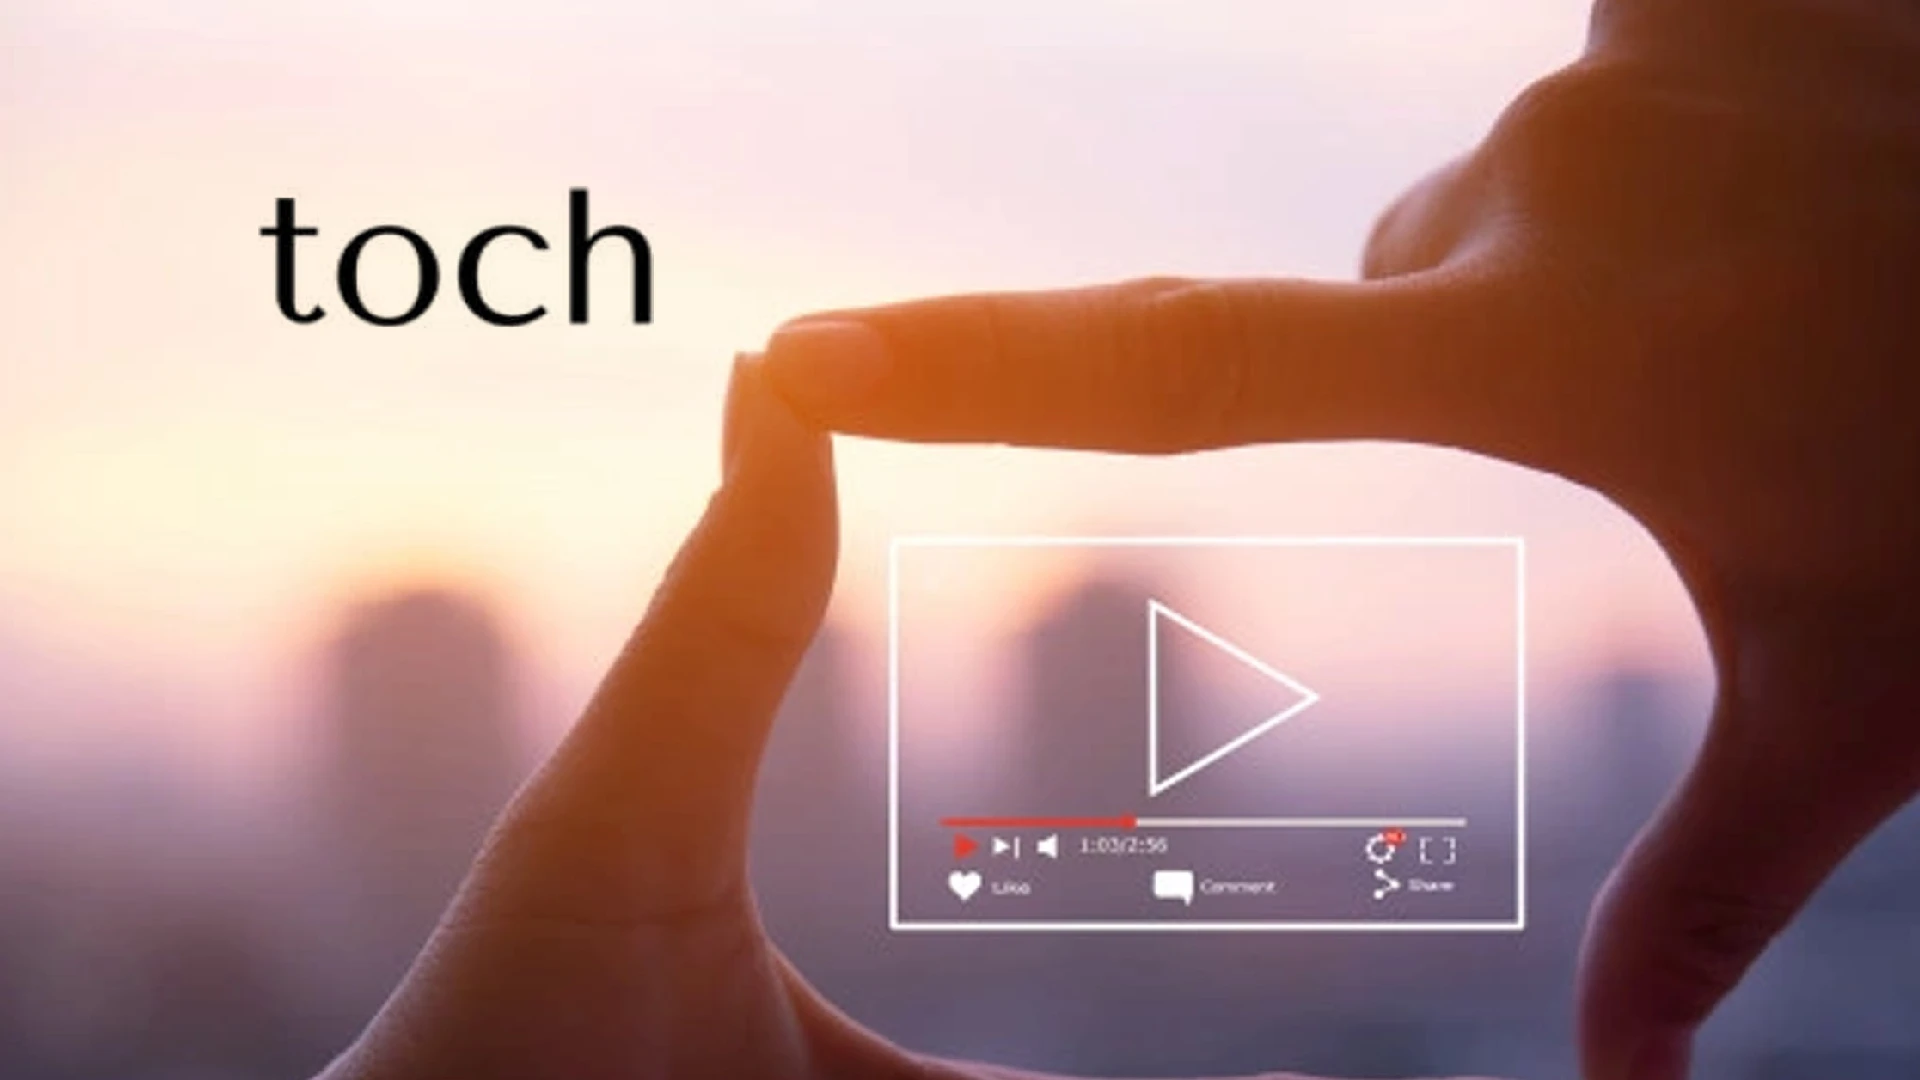 VideoVerse, New Brand Identity for Toch / VideoVerse